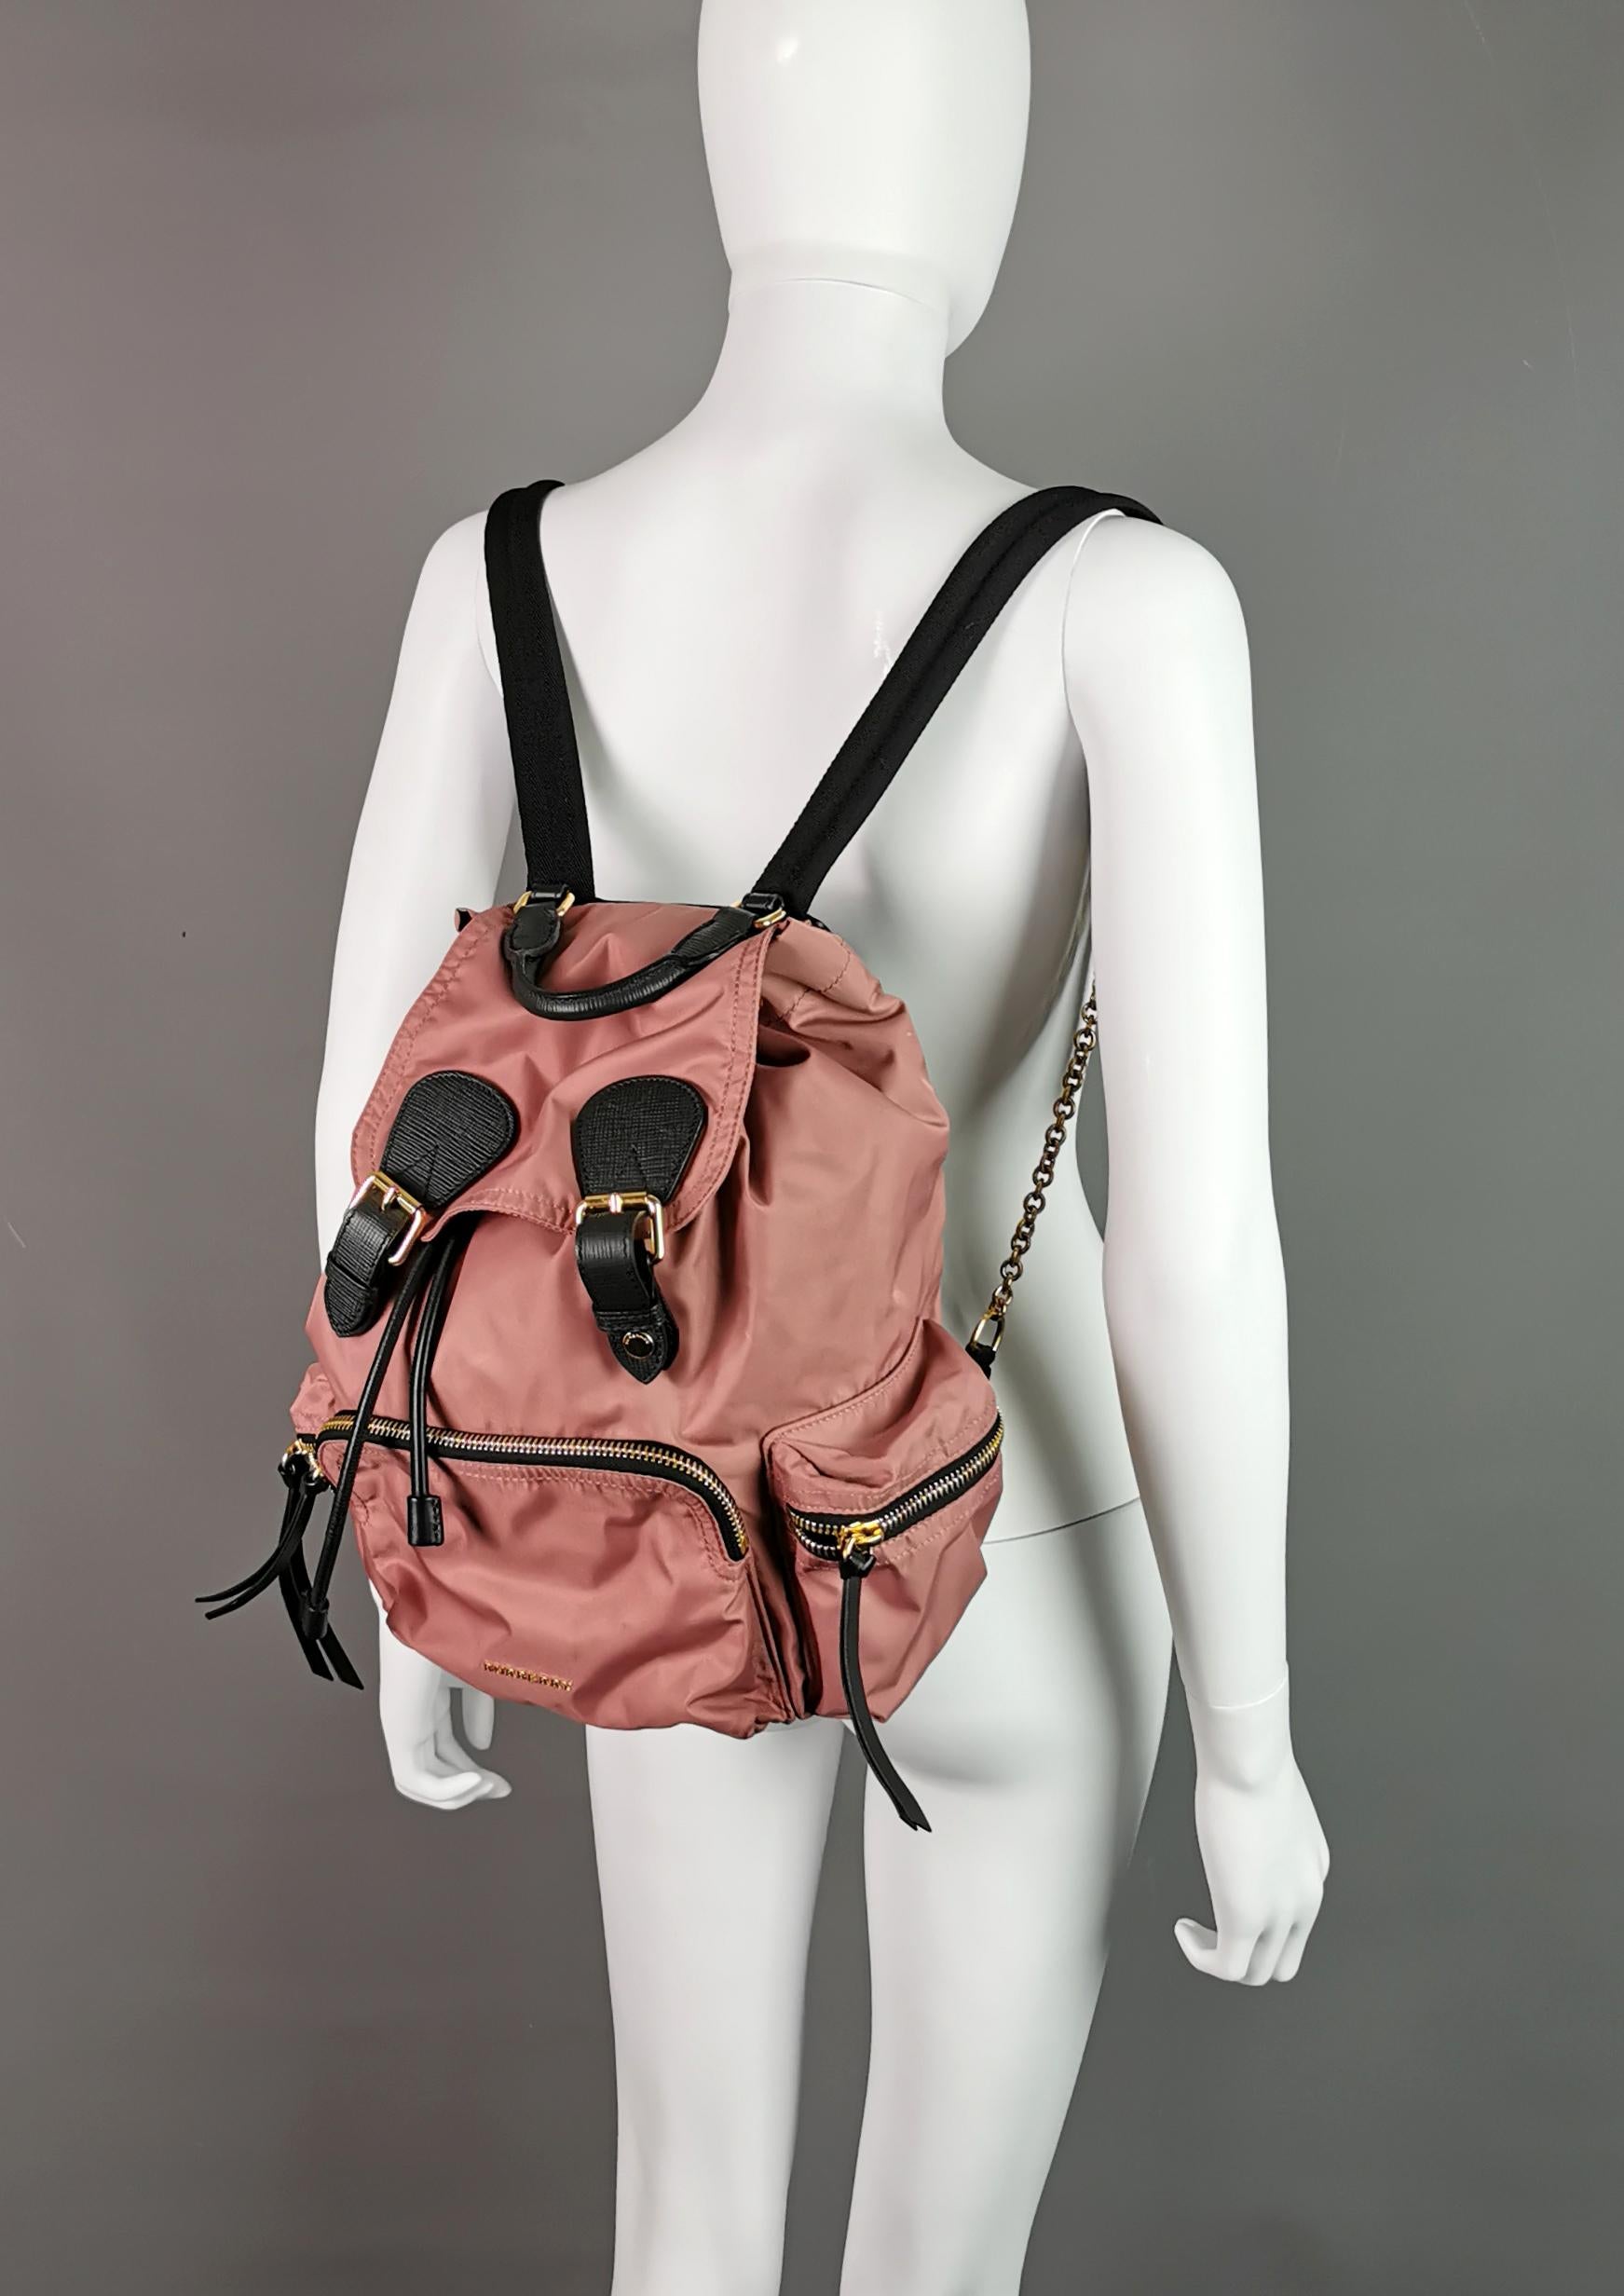 You gotta love this stylish and luxe rucksack or backpack by Burberry!

This backpack is from the Burberry The Rucksack range and is finished in a lovely dusky pink nylon with black accents and gold tone metal hardware, the colours work so well